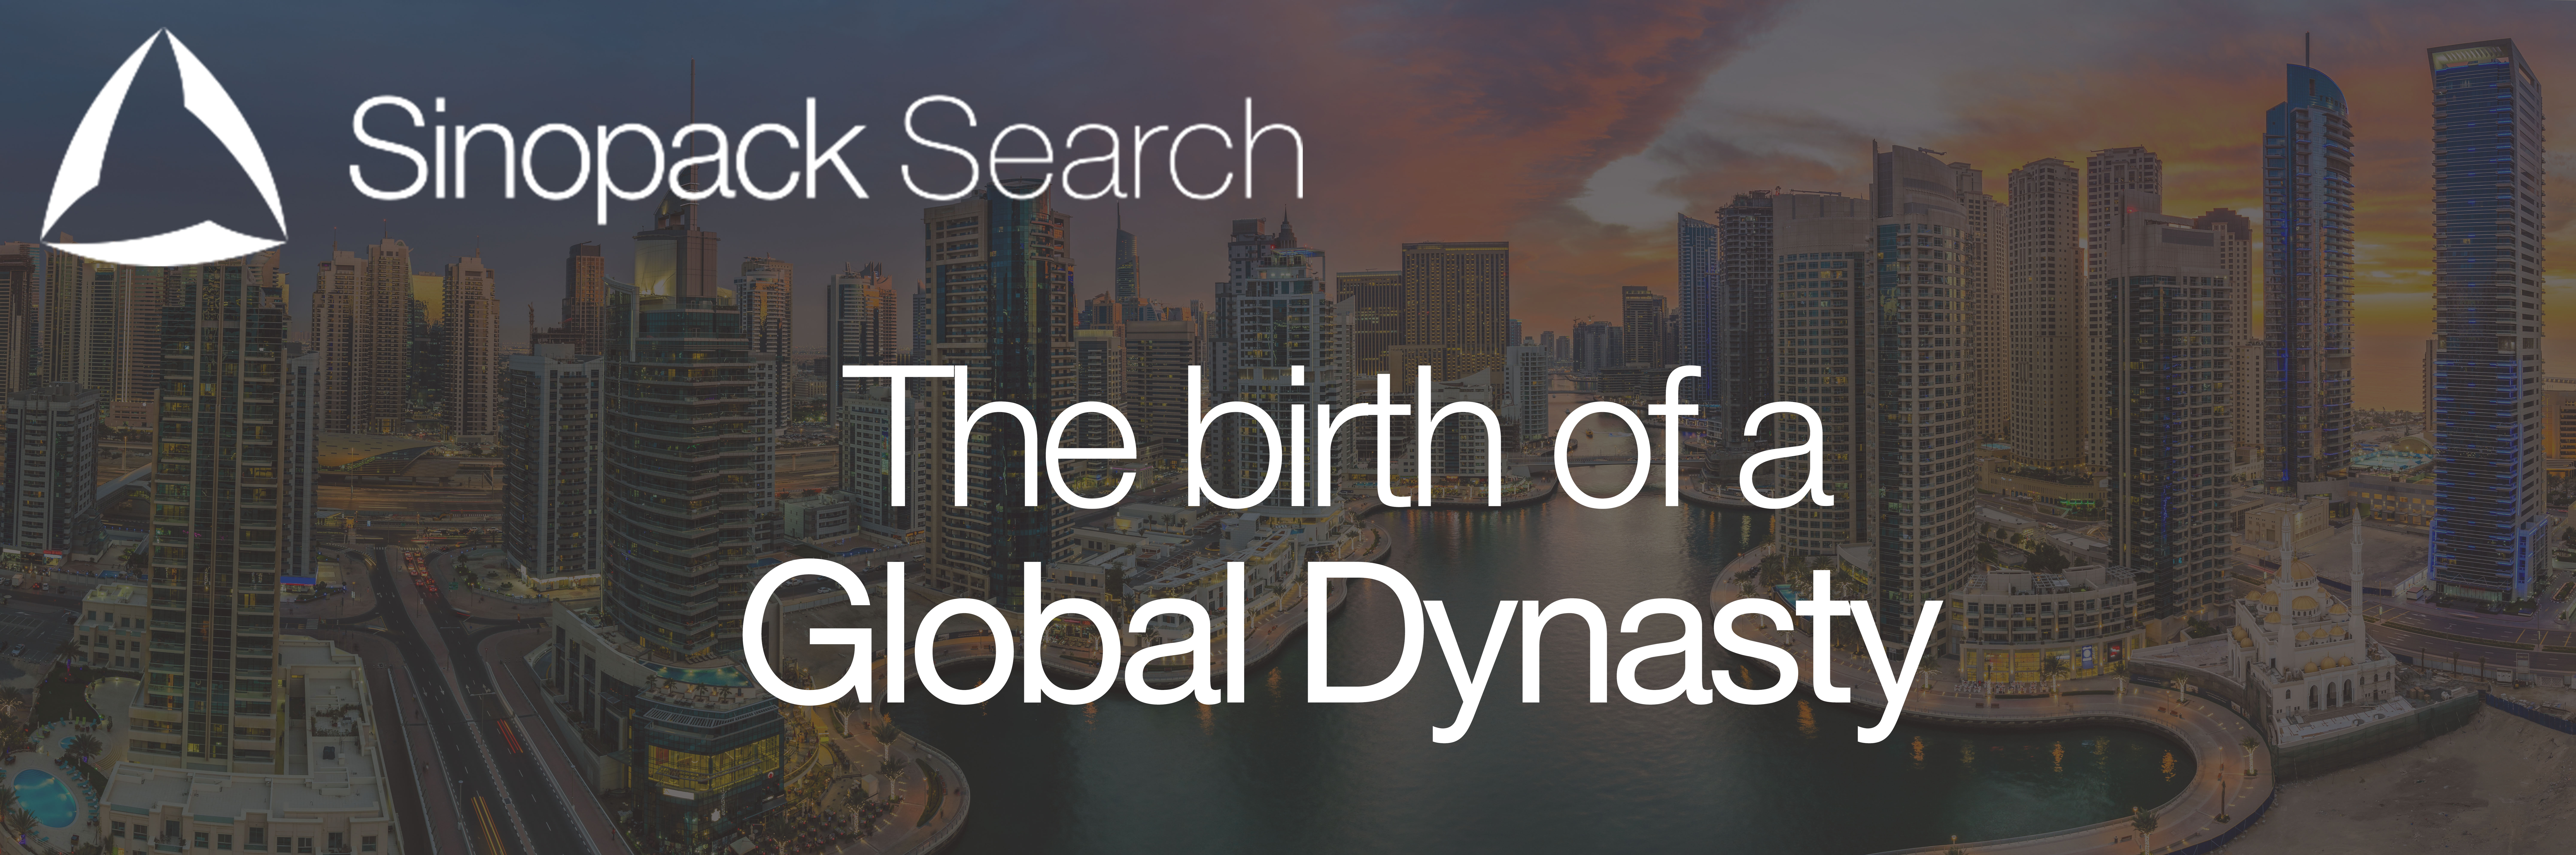 The Birth of a Global Dynasty